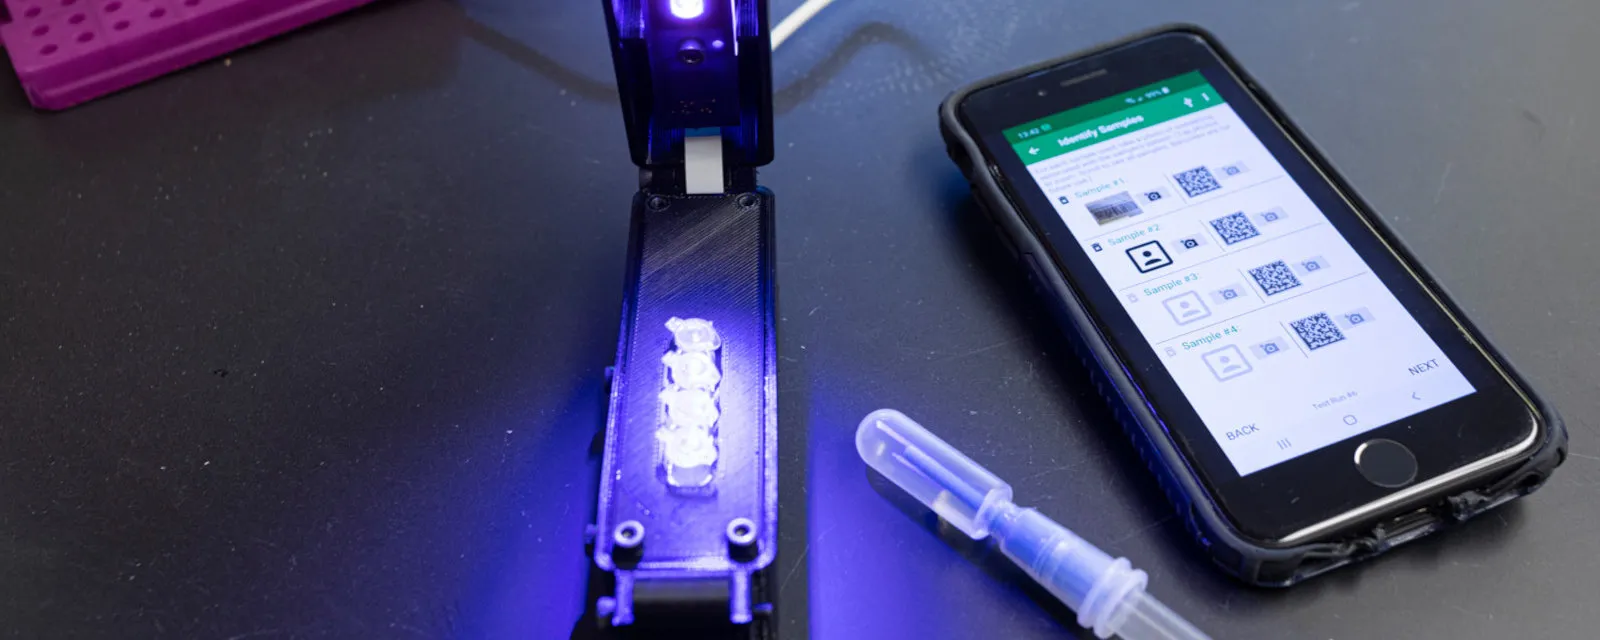 UV light next to cellphone showing test detecting COVID-19 virus genome